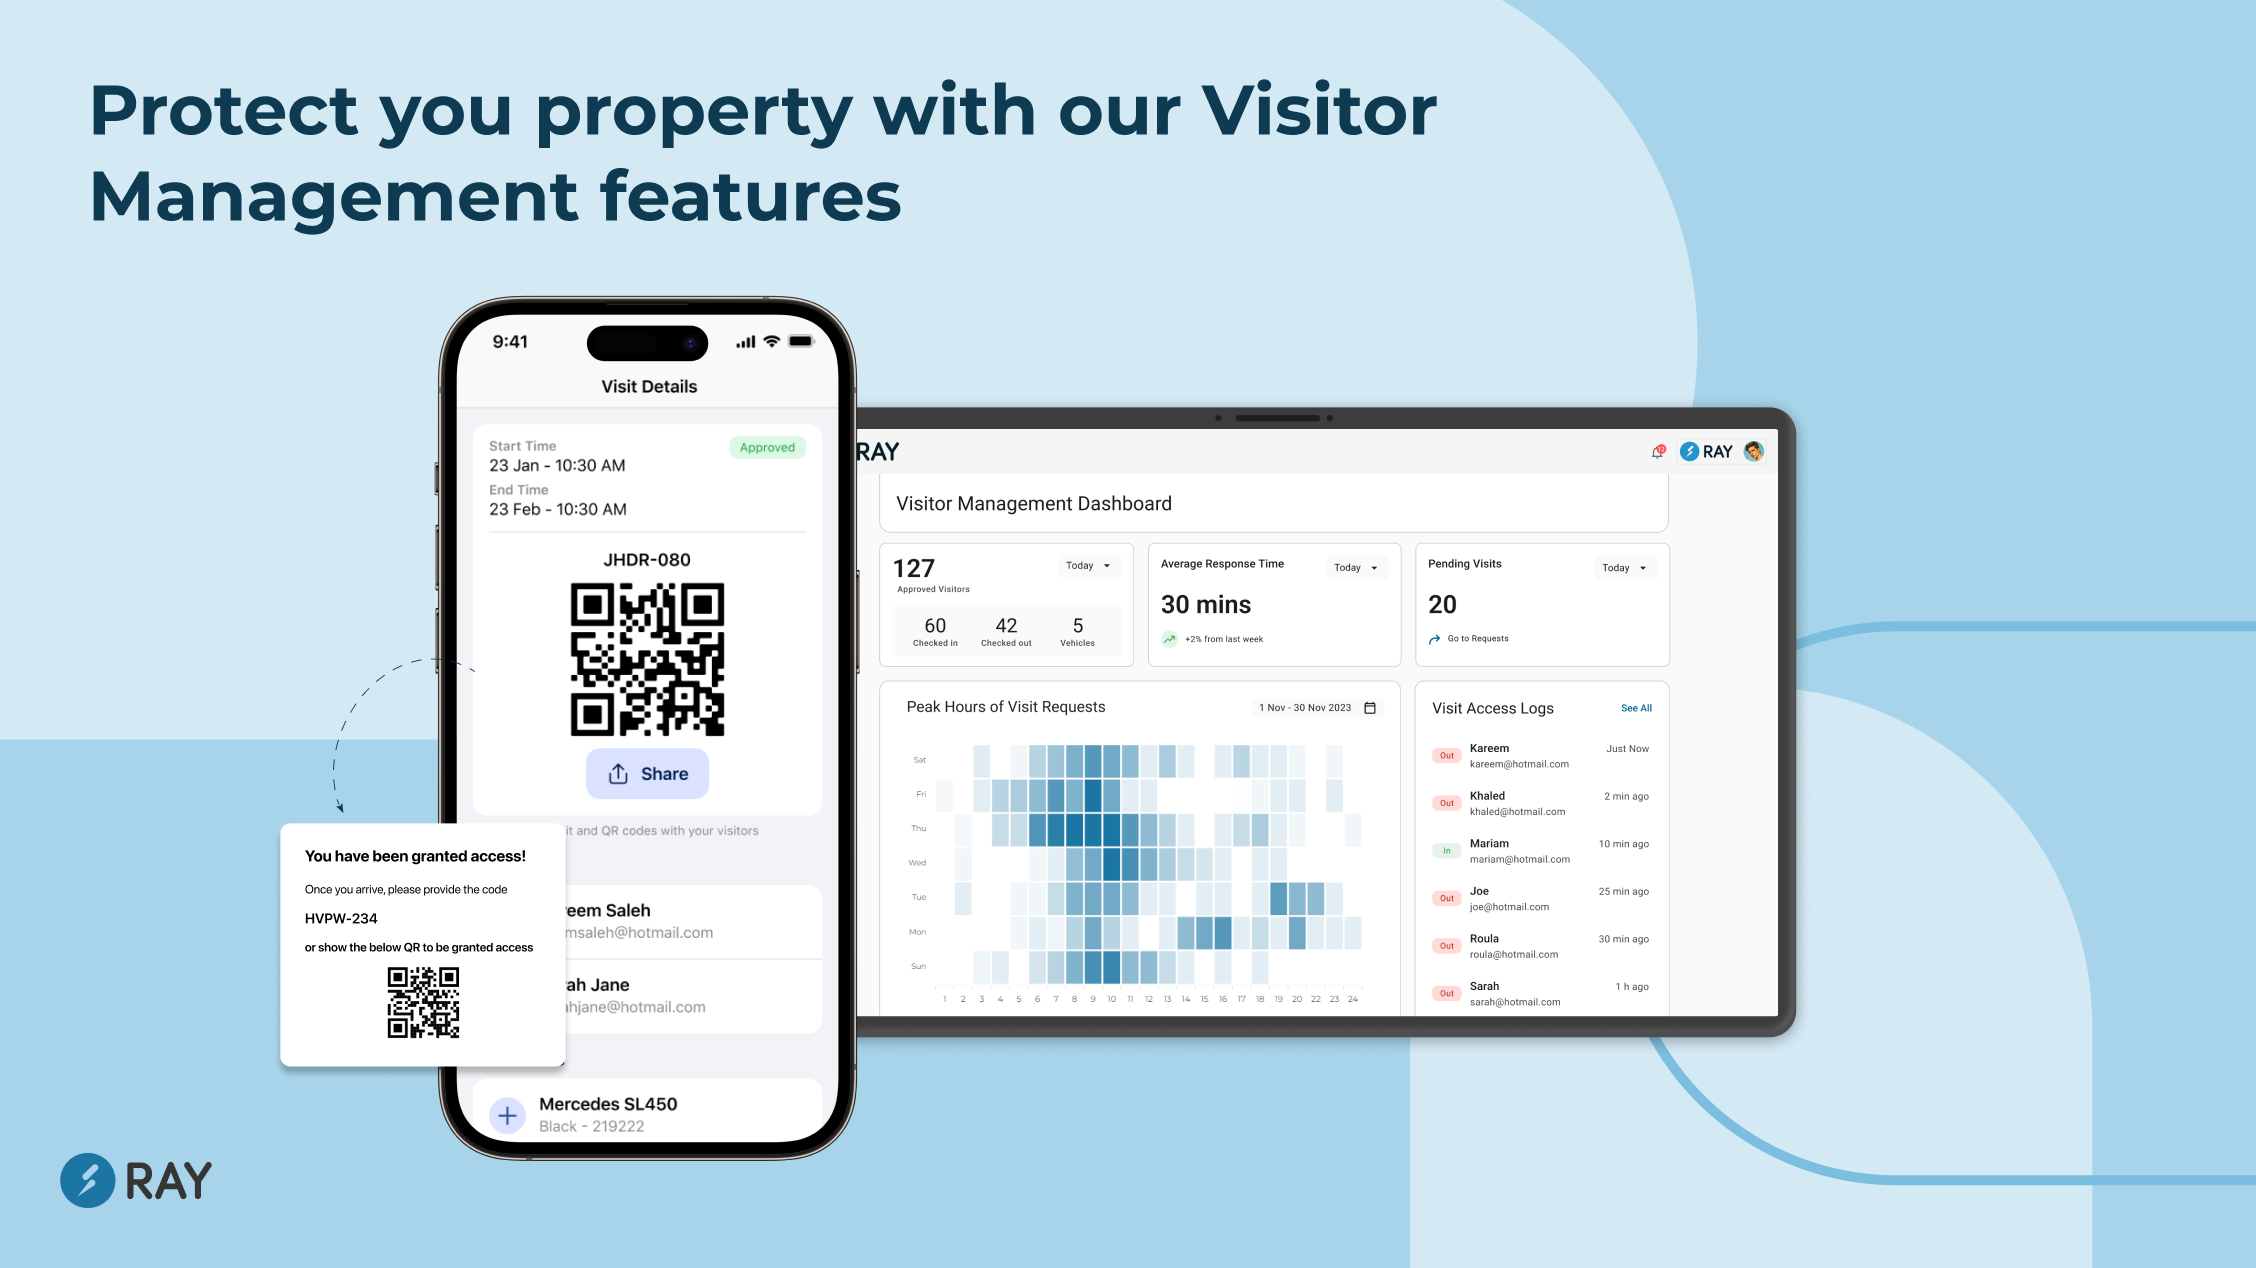 Protect your property with our visitor management features!